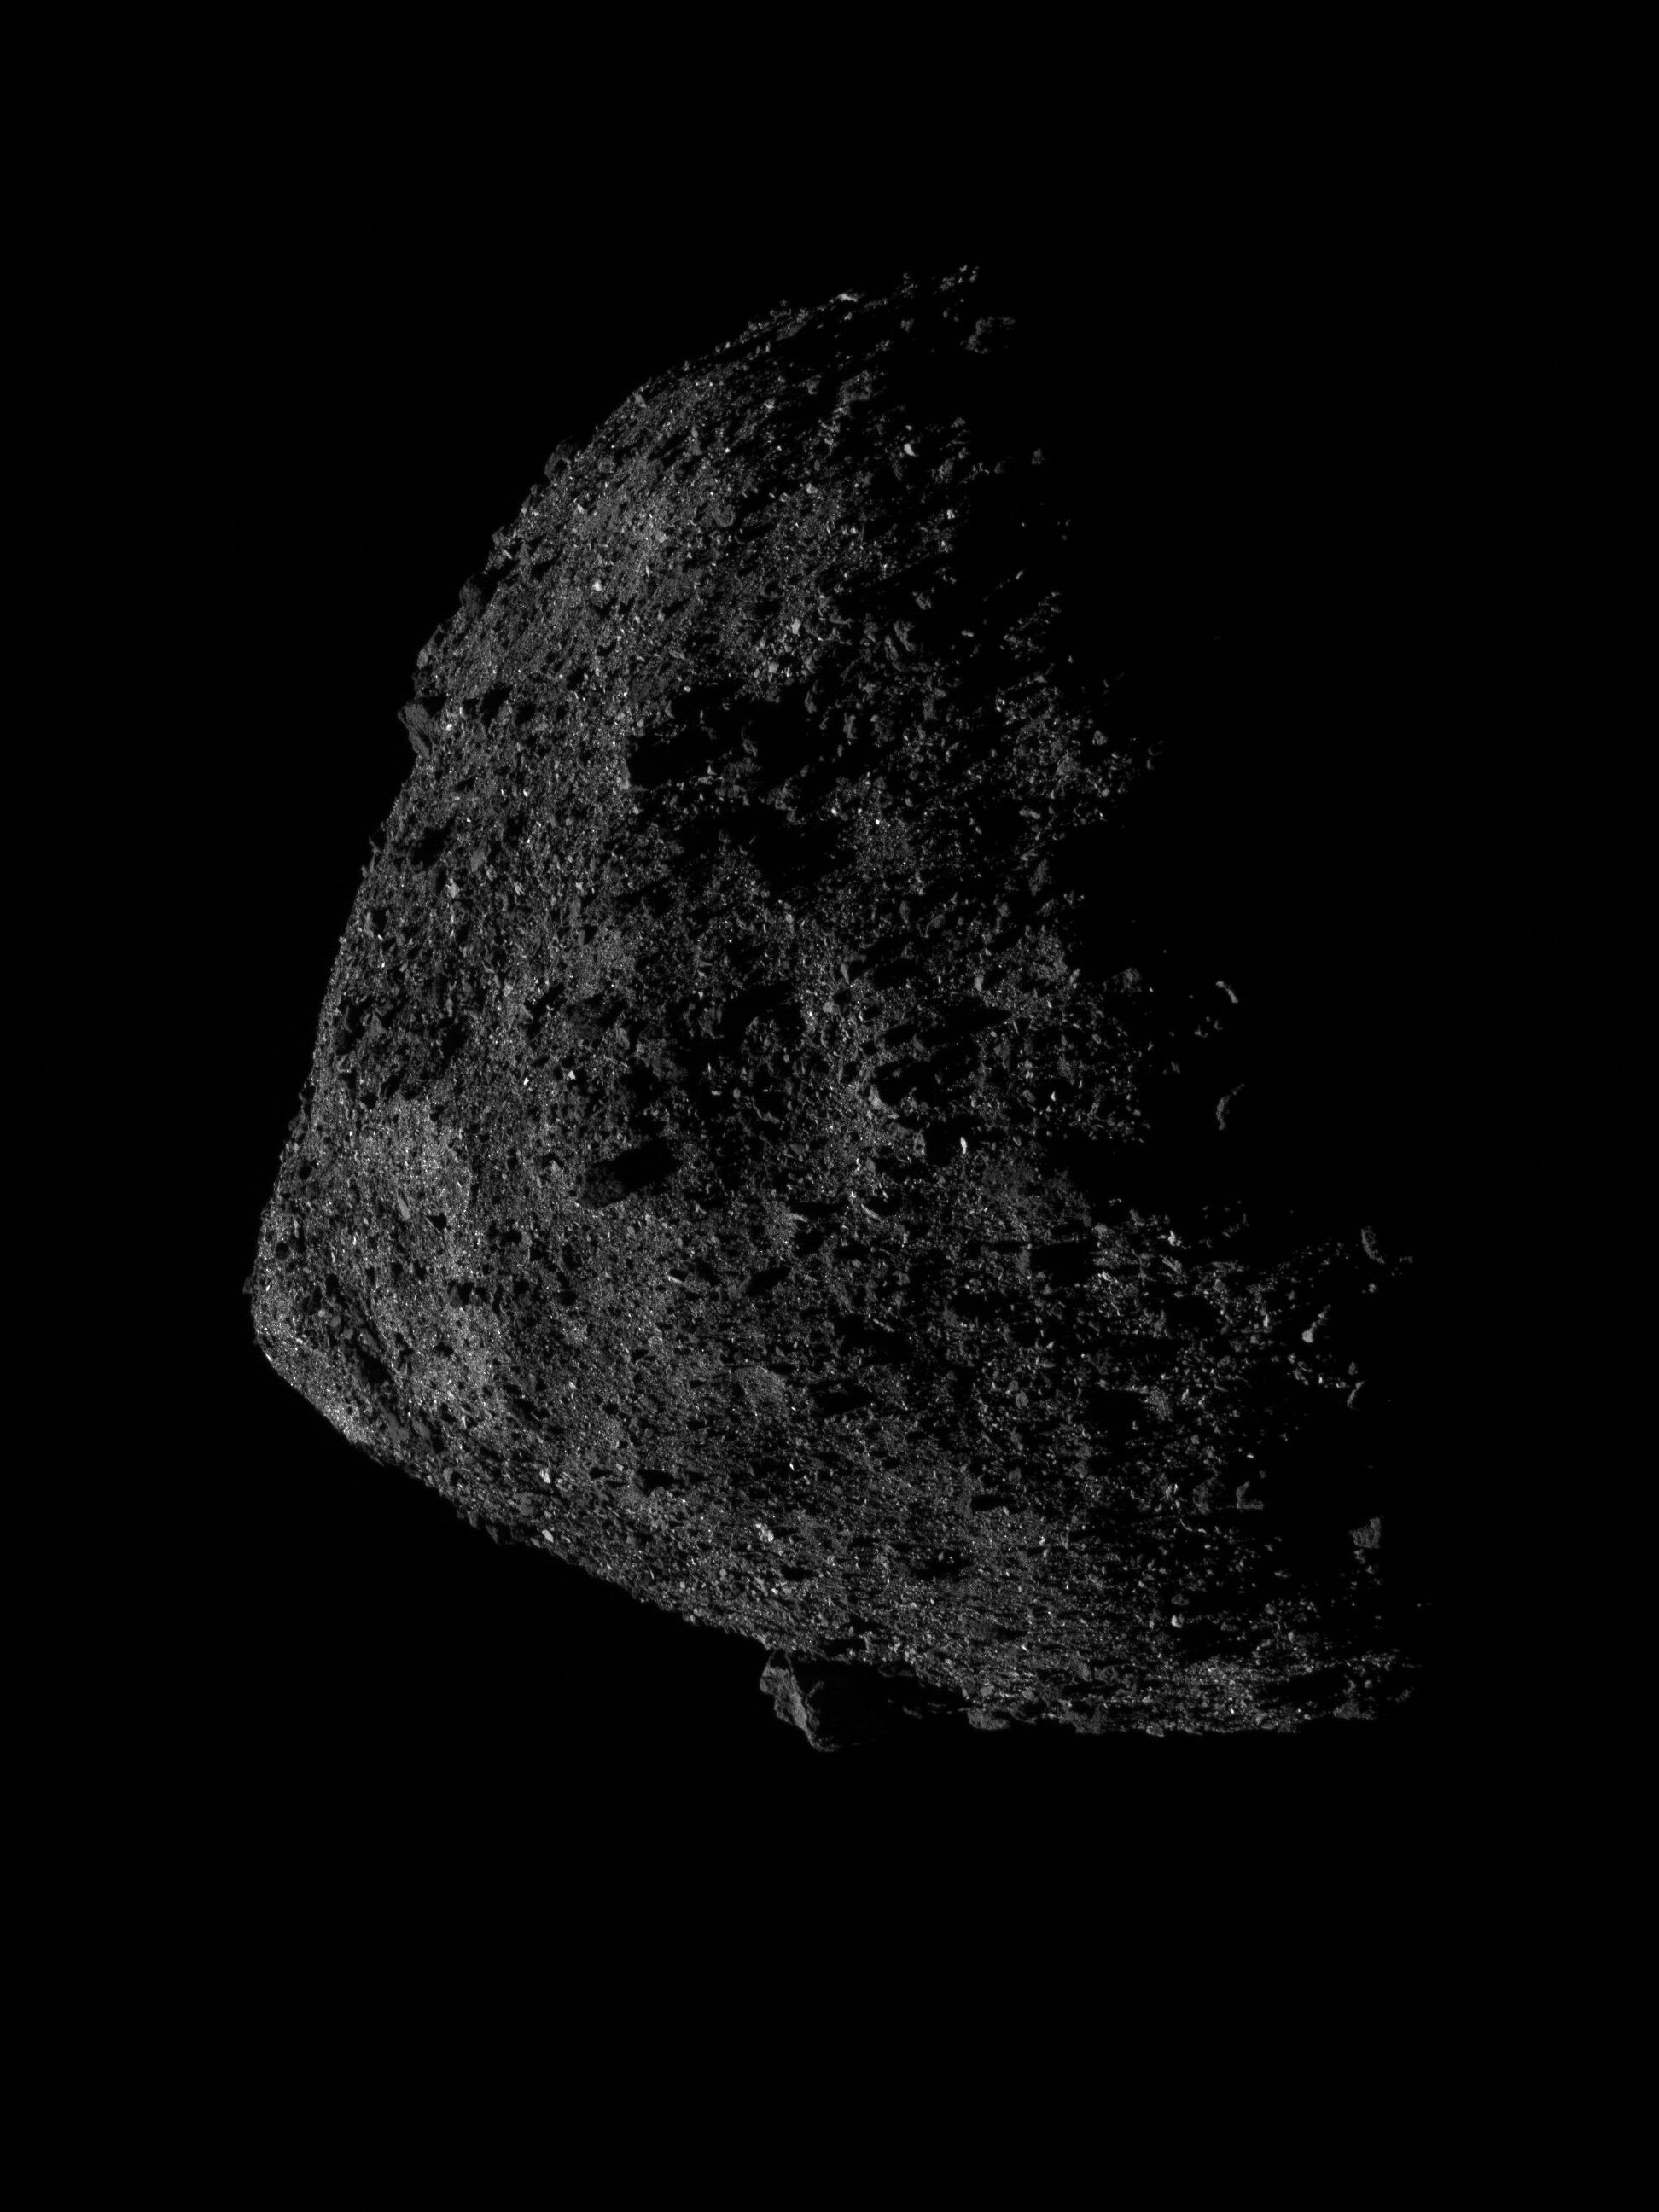 Bennu is a half-kilometer-wide asteroid on a near-Earth orbit. This image by the OSIRIS-REx spacecraft shows it is a rubble pile, a collection of rocks held together by their own gravity. Credit: NASA/Goddard/University of Arizona/Lockheed Martin